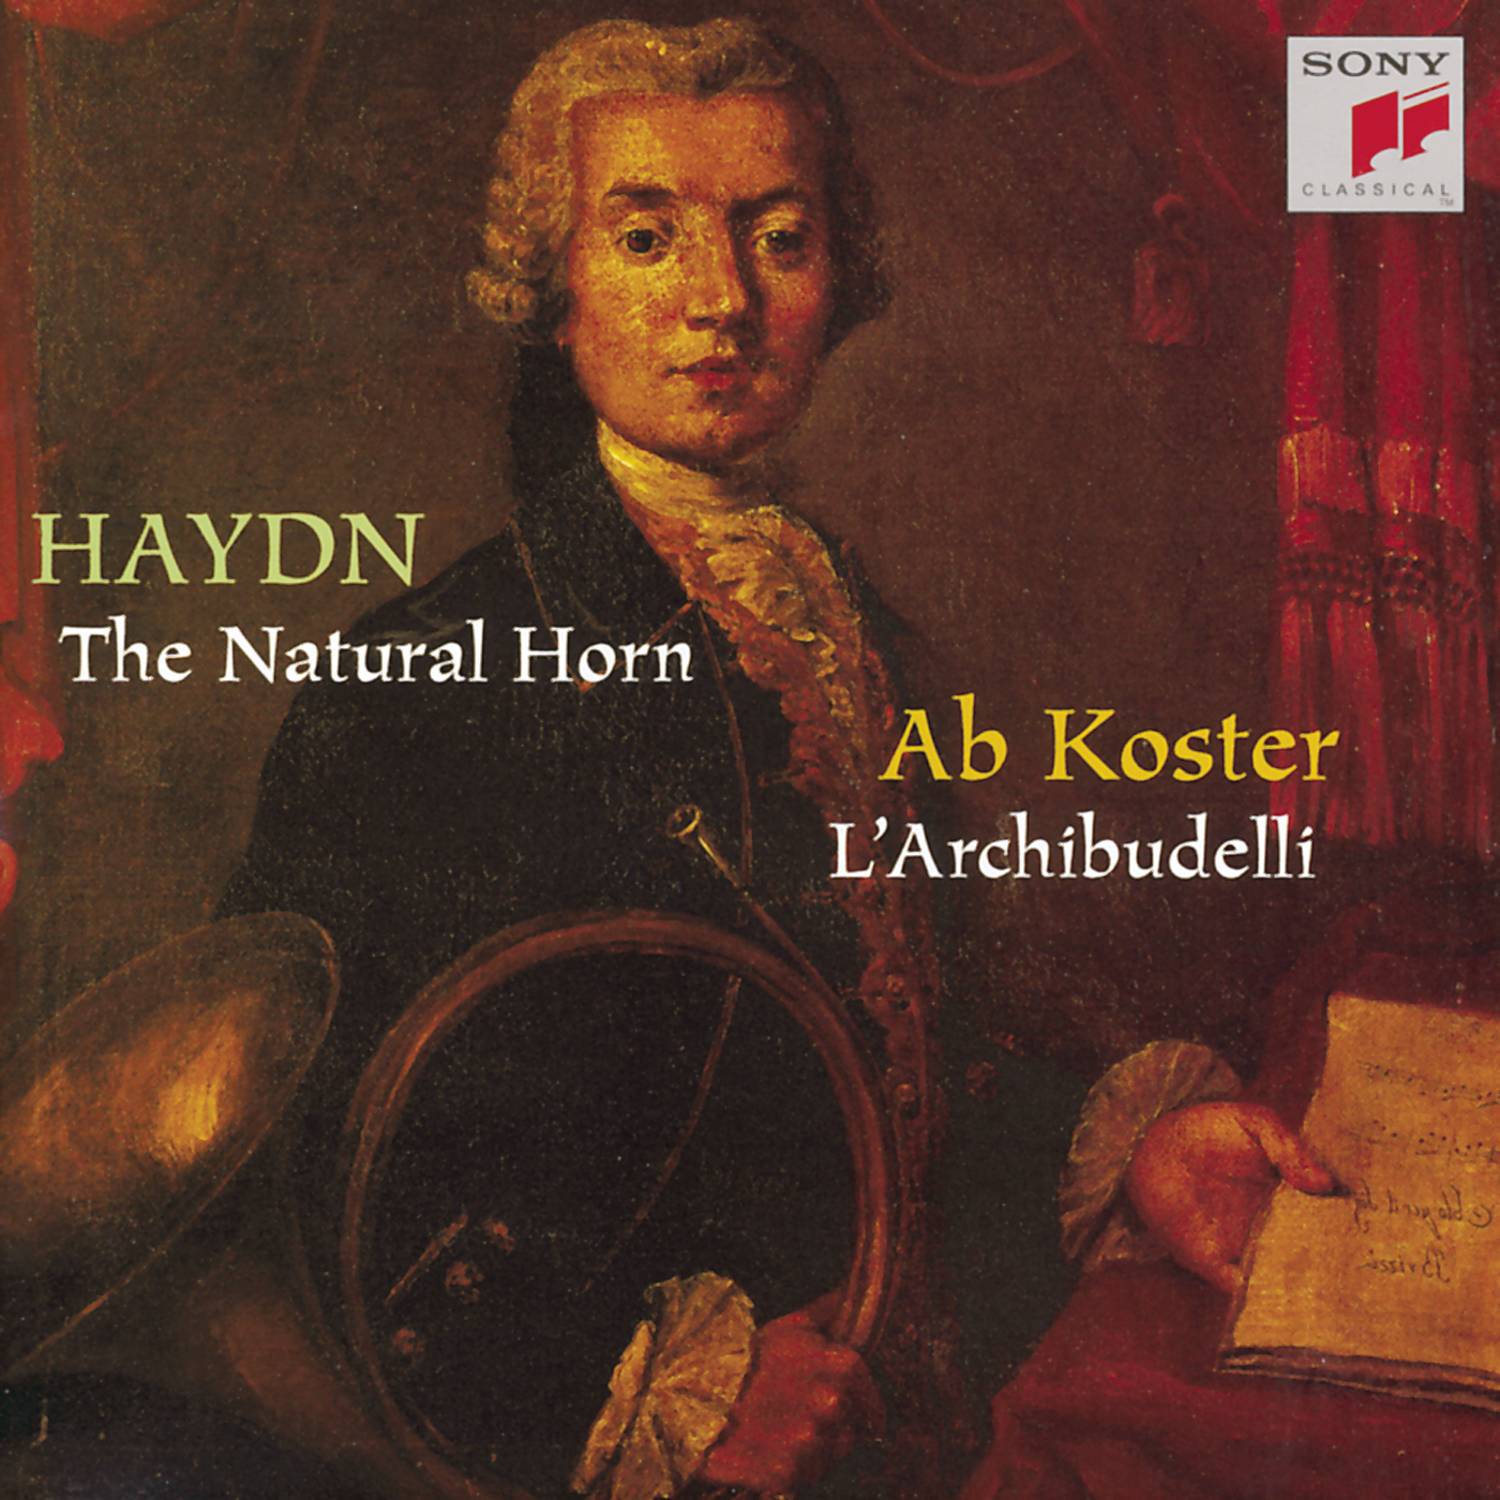 Concerto in D Major for Horn, 2 Oboes and Strings, Hob. VII d:3: II. Adagio